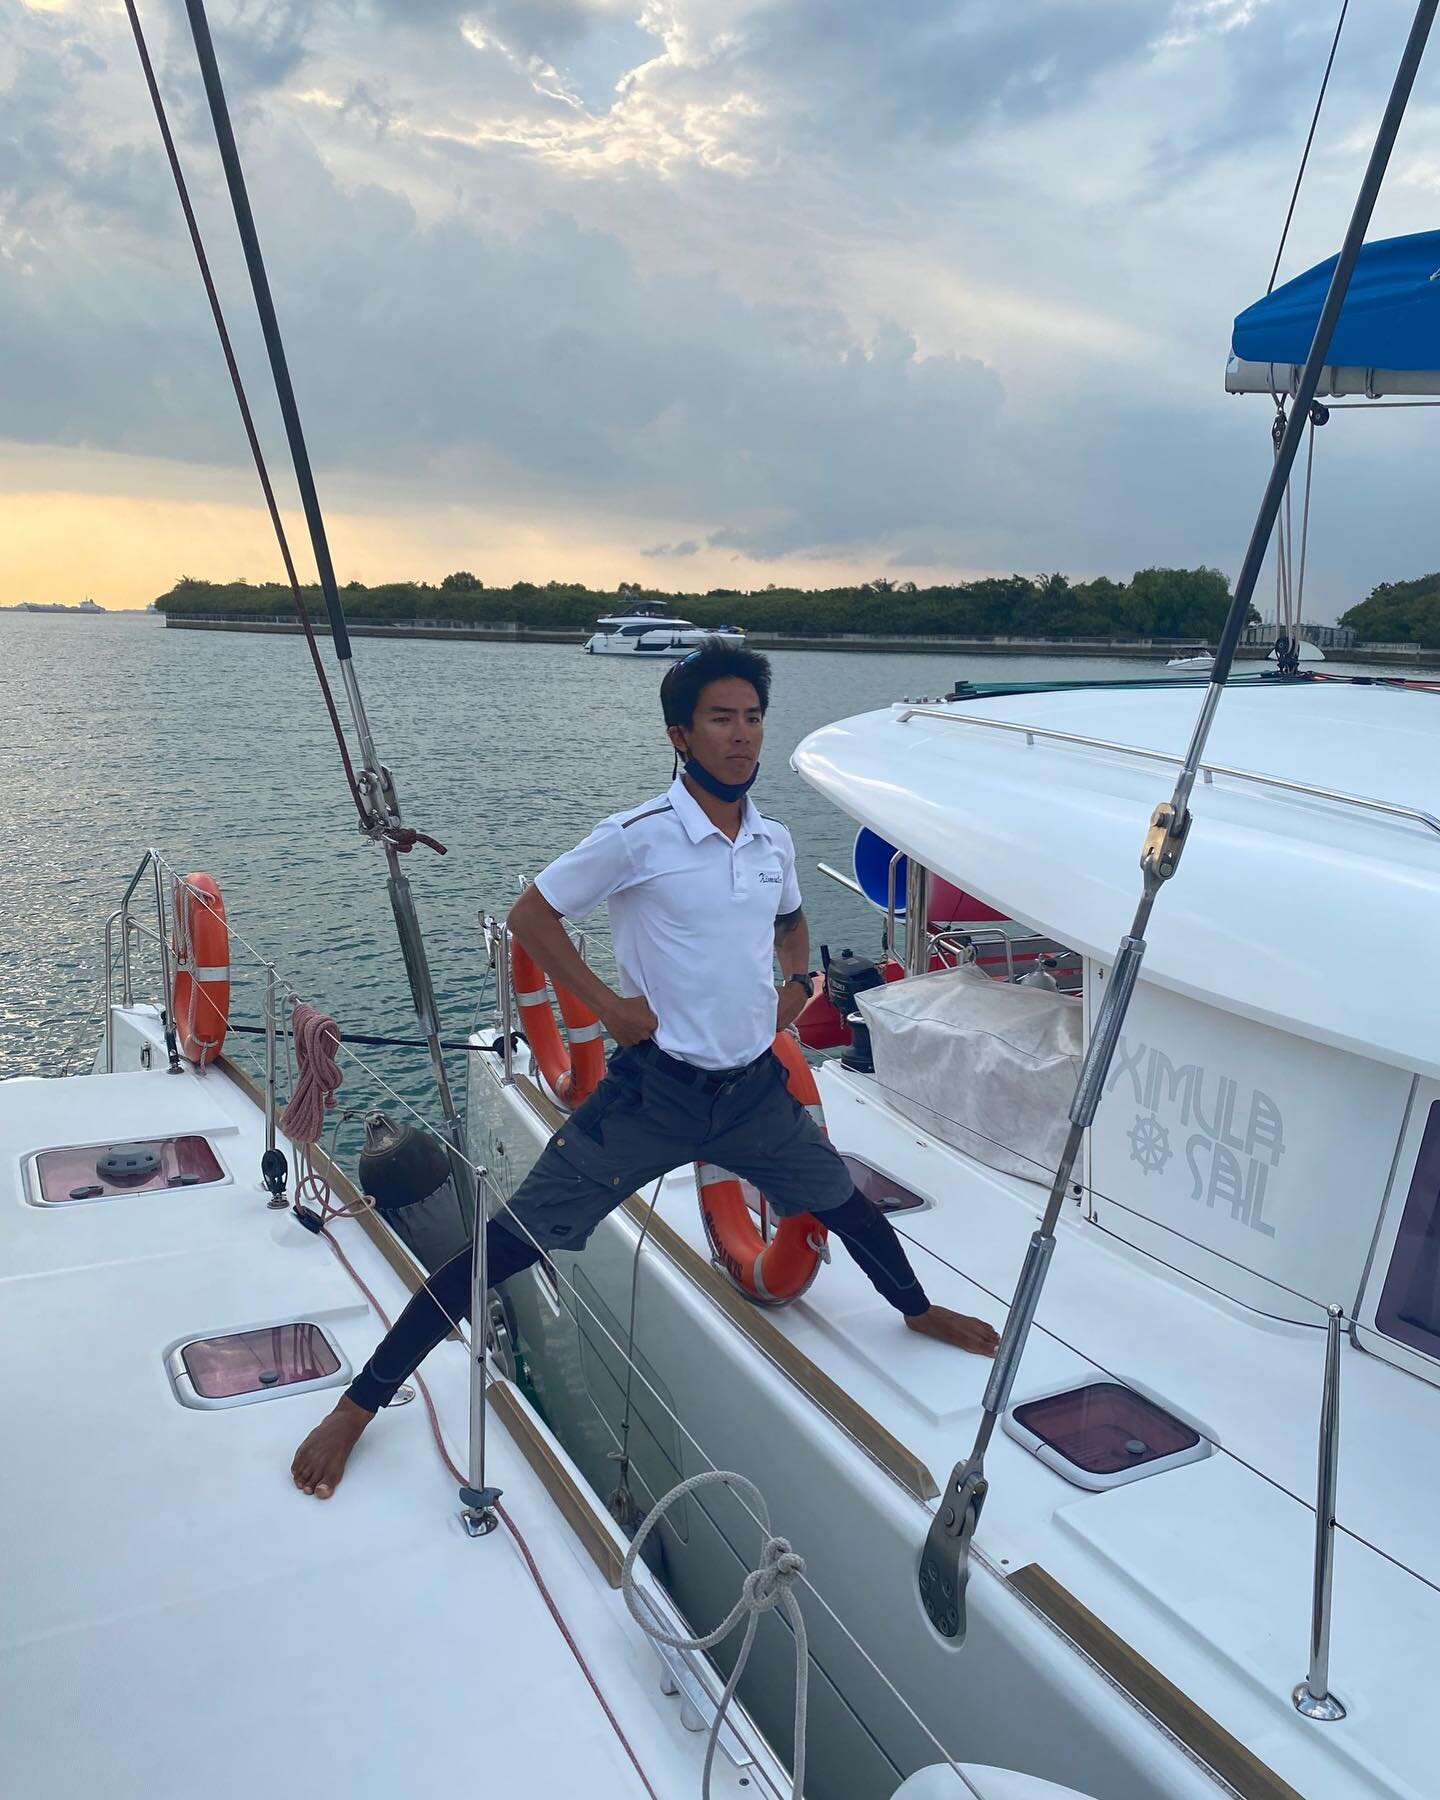 Have more than 18 guests for your party? No problem. We can always tie both Ximula and Gracefully together, and you can still mingle with one another by crossing glamorously, like our Captain Faris here ;) #ximulasail #yachtchartersg #yachtparty #yac